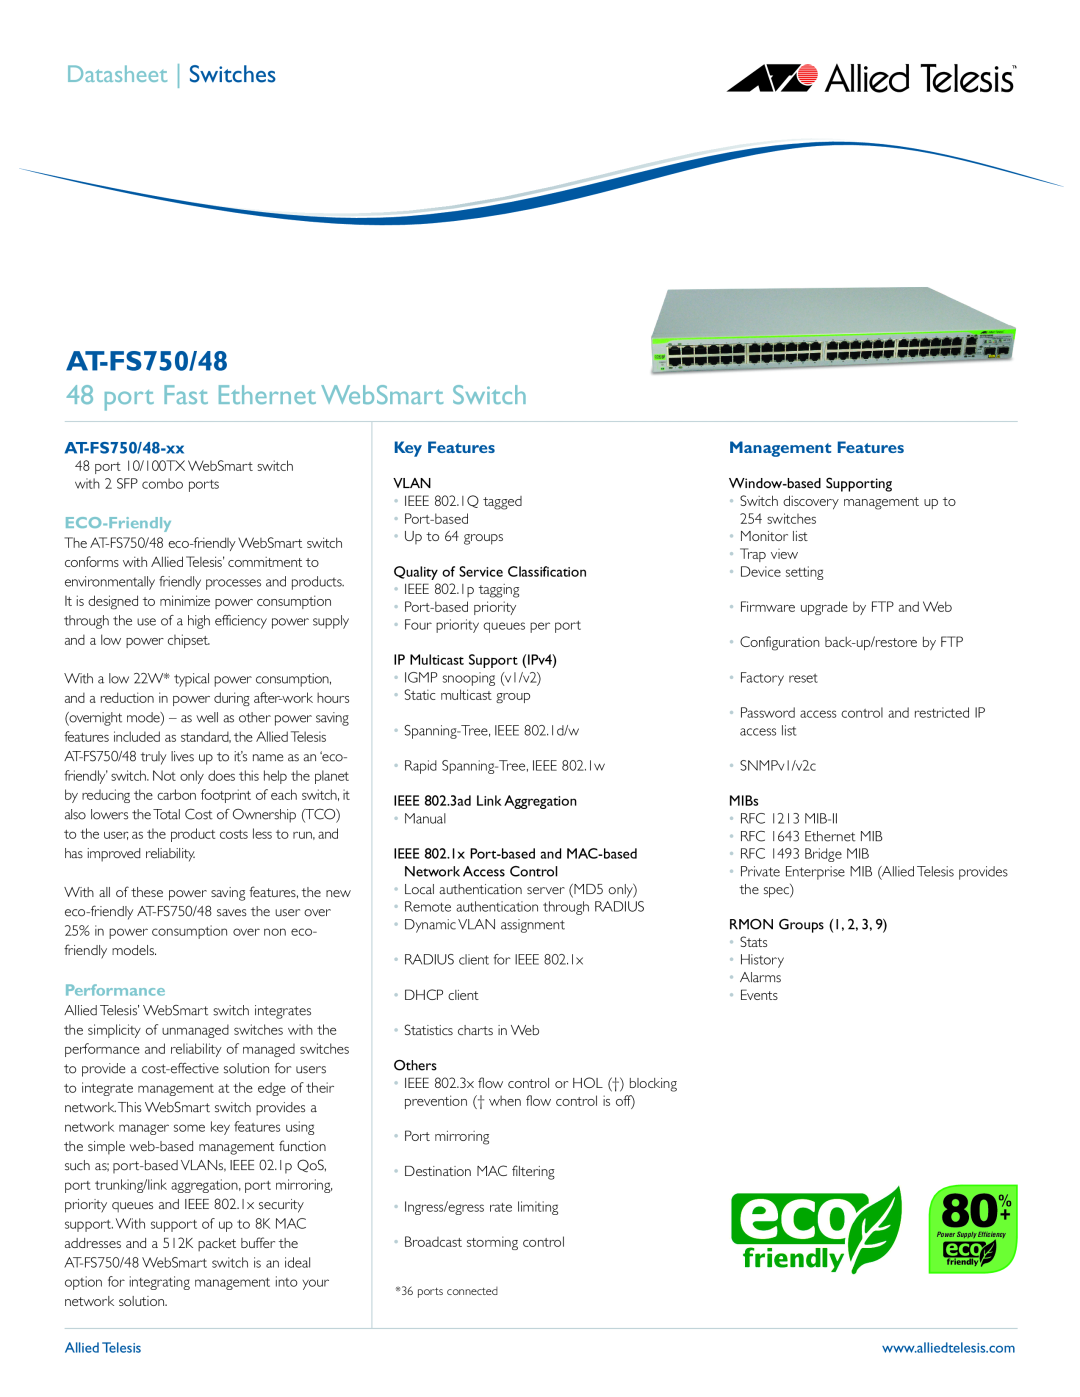 Allied Telesis manual port Fast Ethernet WebSmart Switch, AT-FS750/48-xx, Key Features, Management Features 